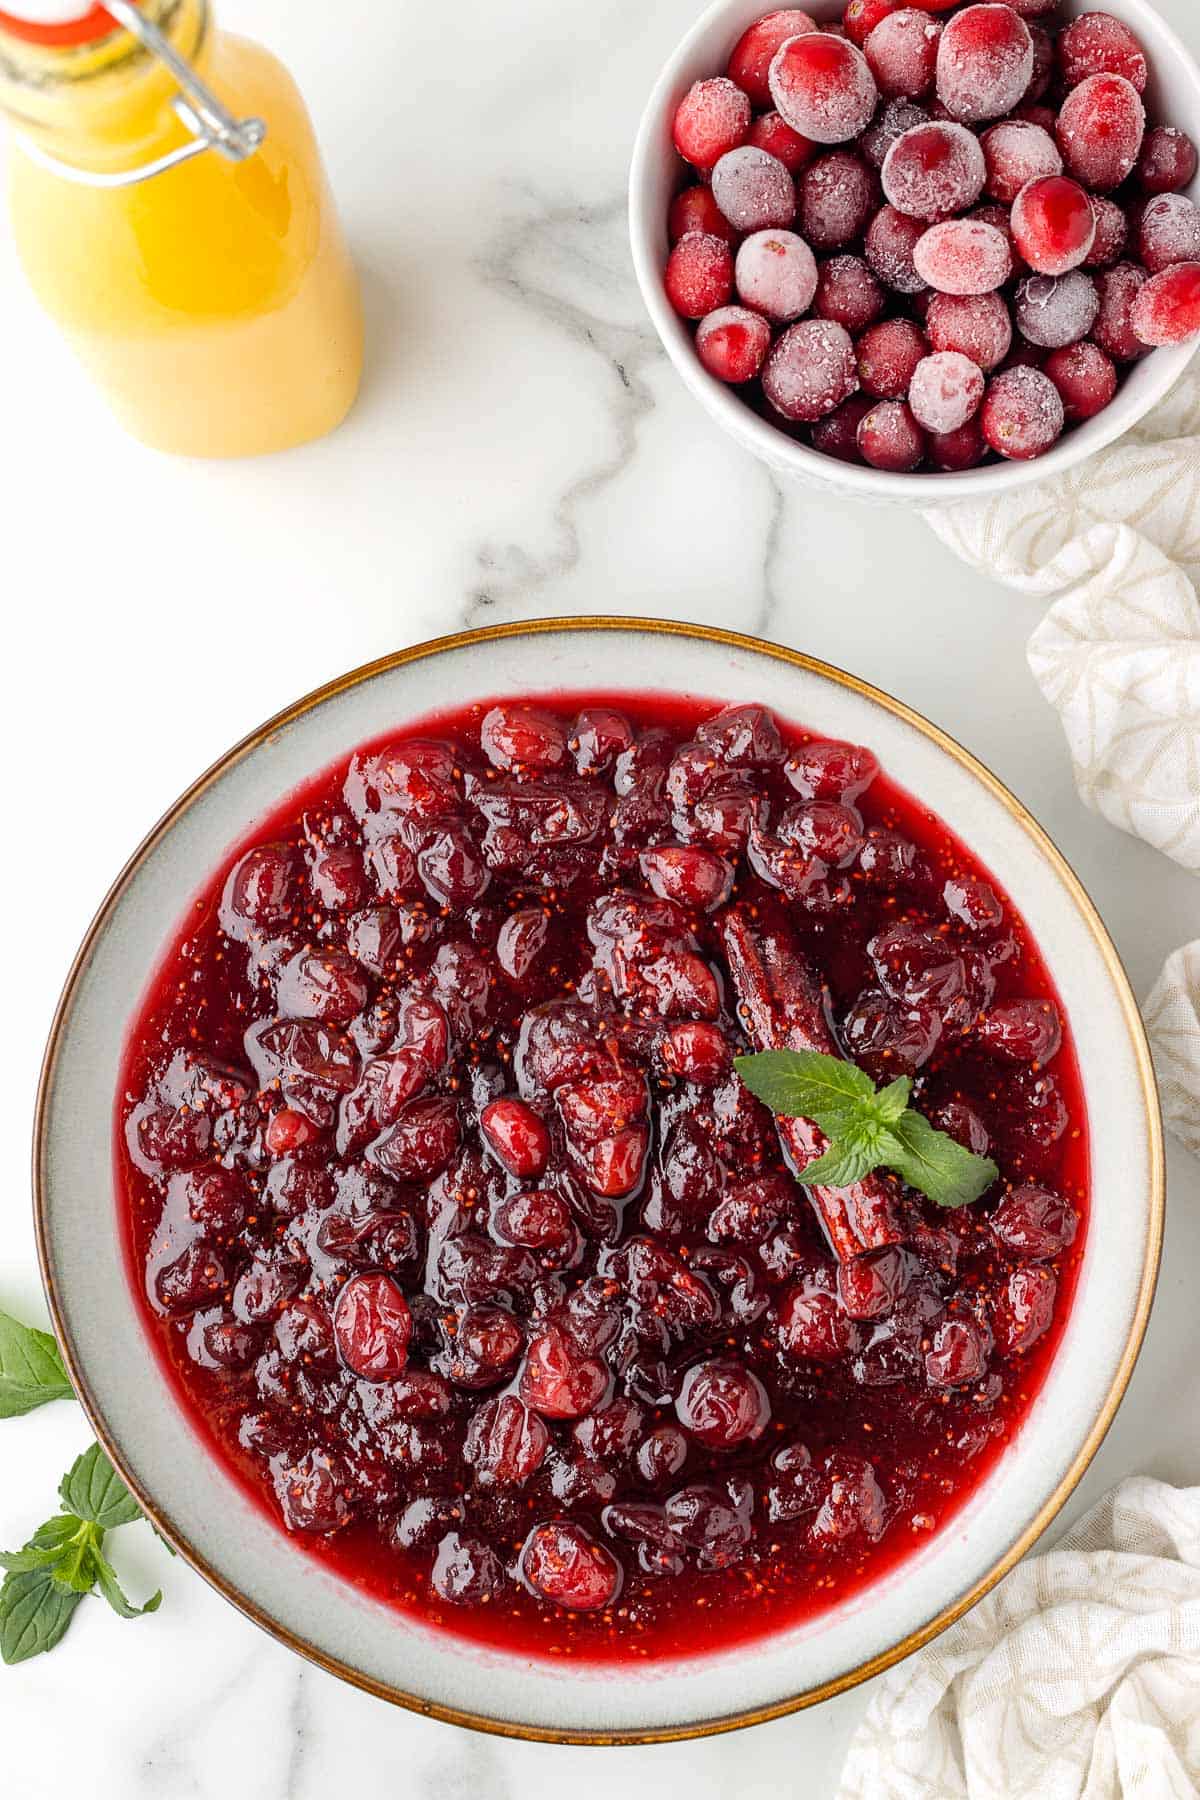 a bowl of homemade cranberry sauce, garnished with fresh mint and cinnamon